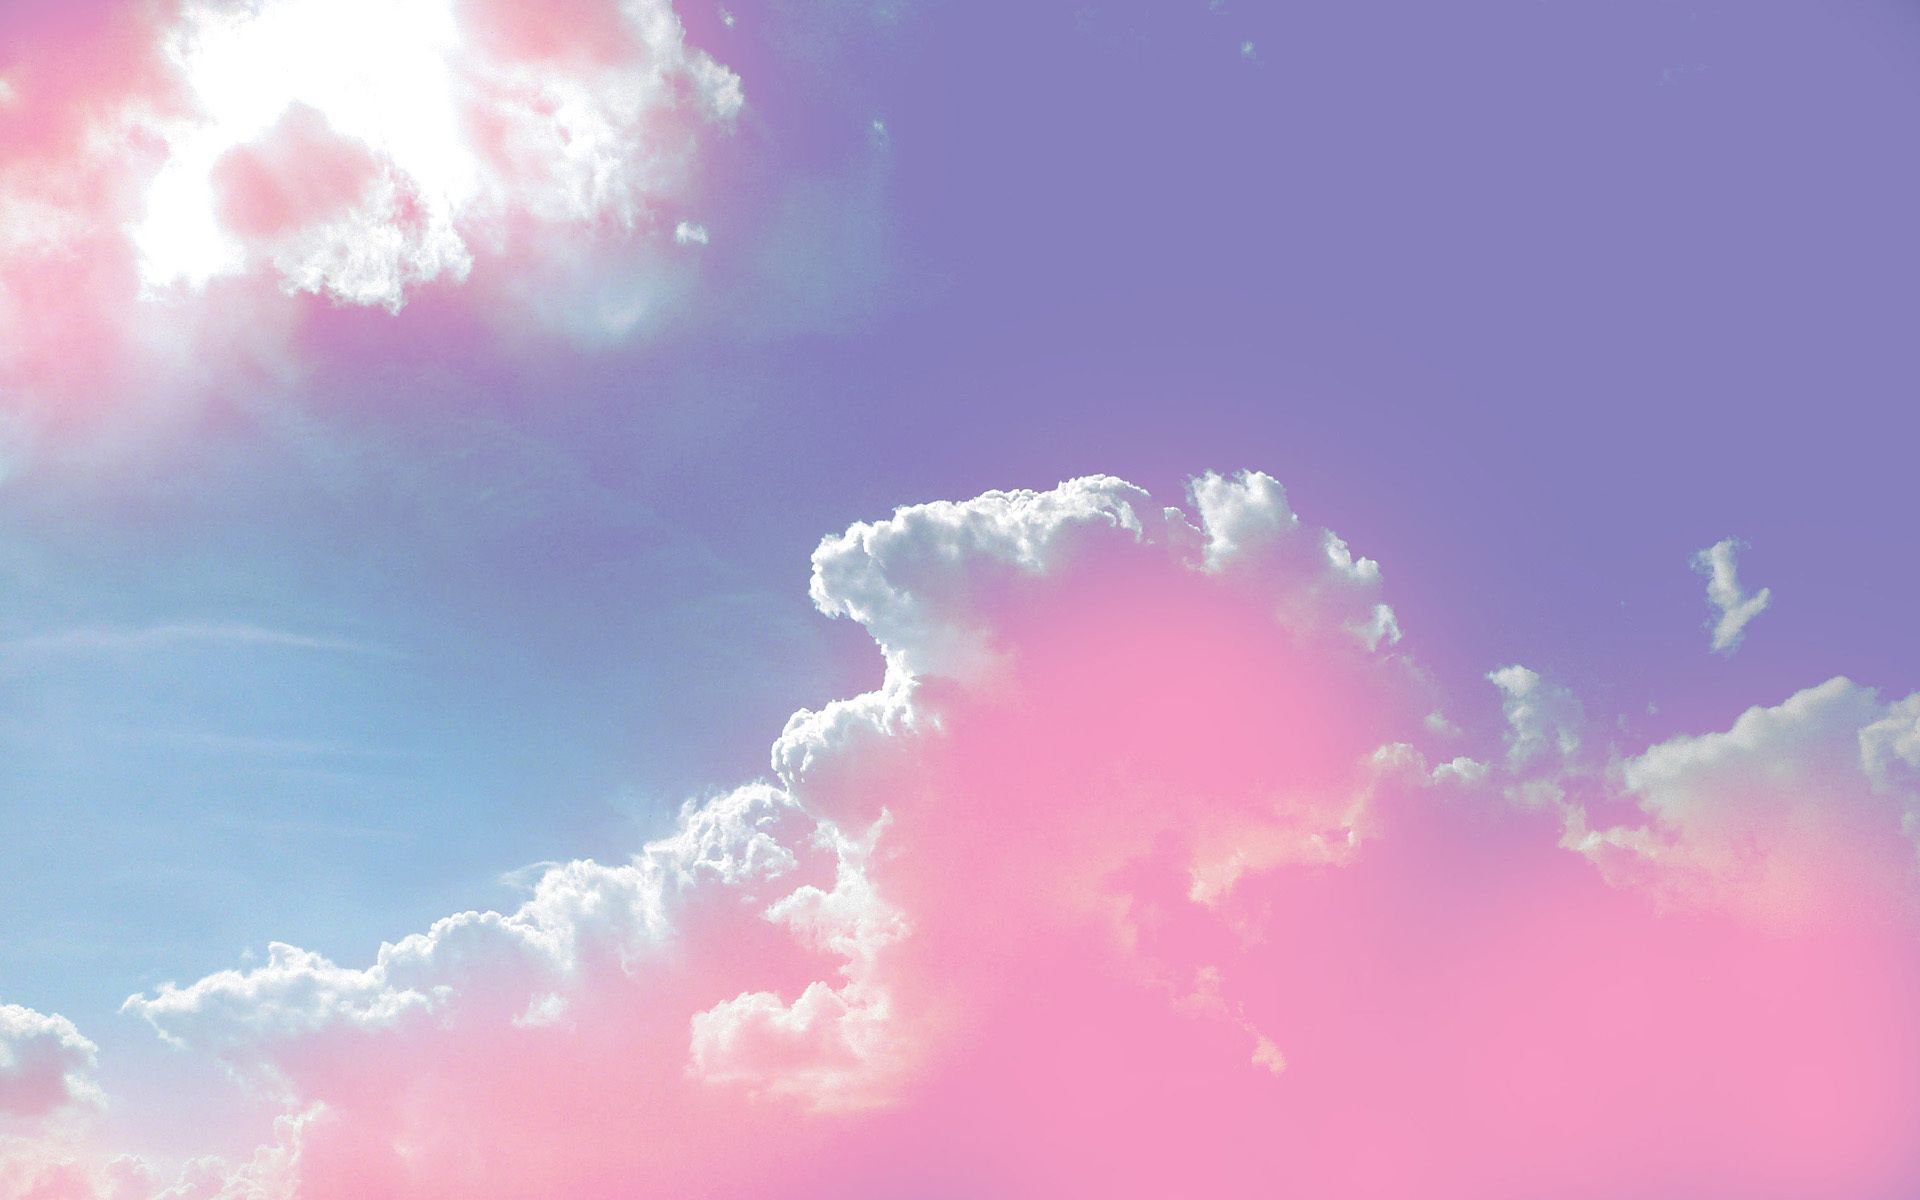 Pink Clouds Poster - Nature print